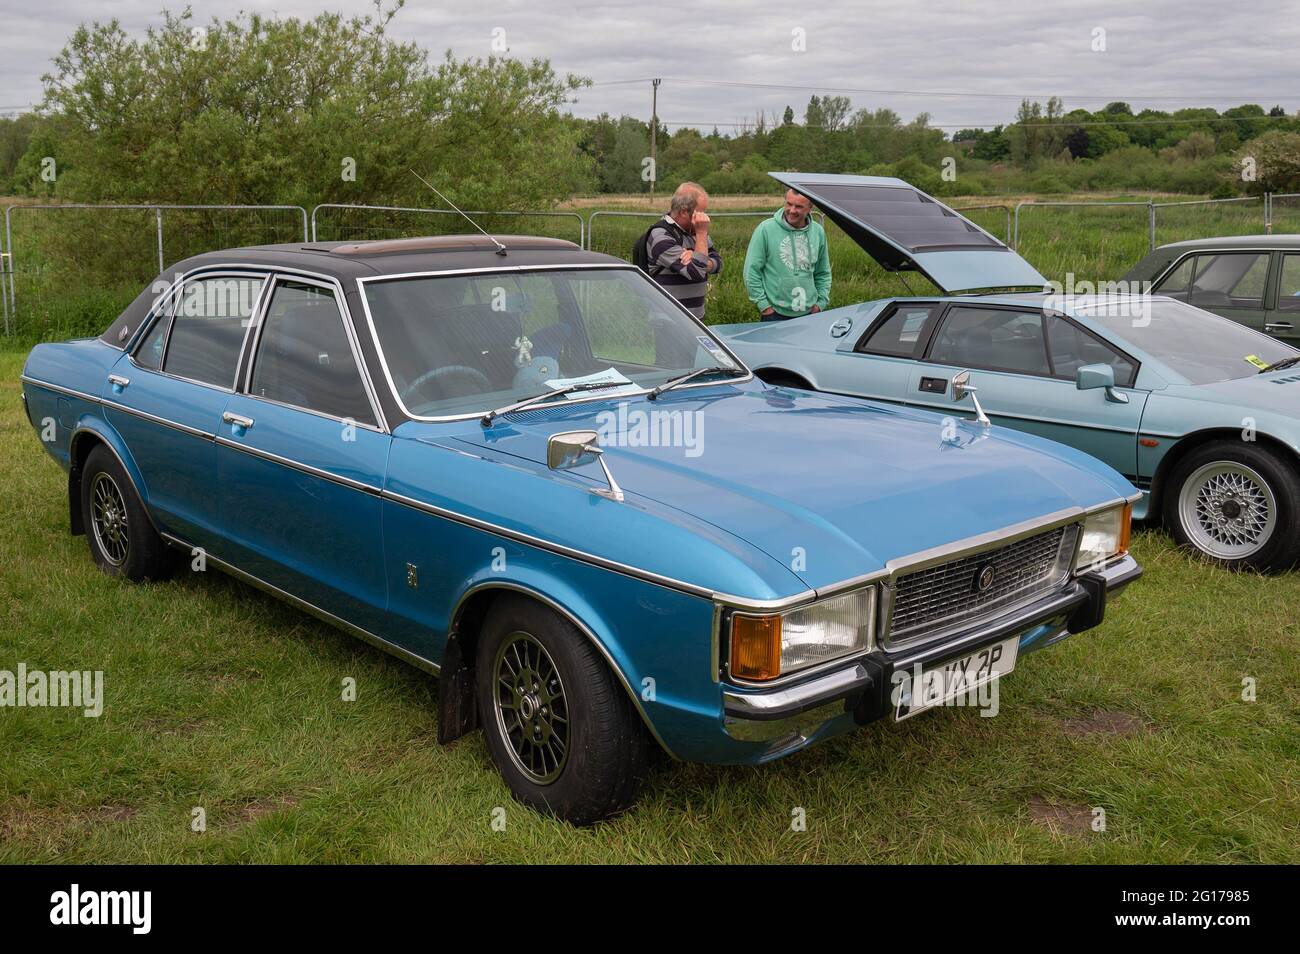 Ford Granada High Resolution Stock Photography and Images - Alamy